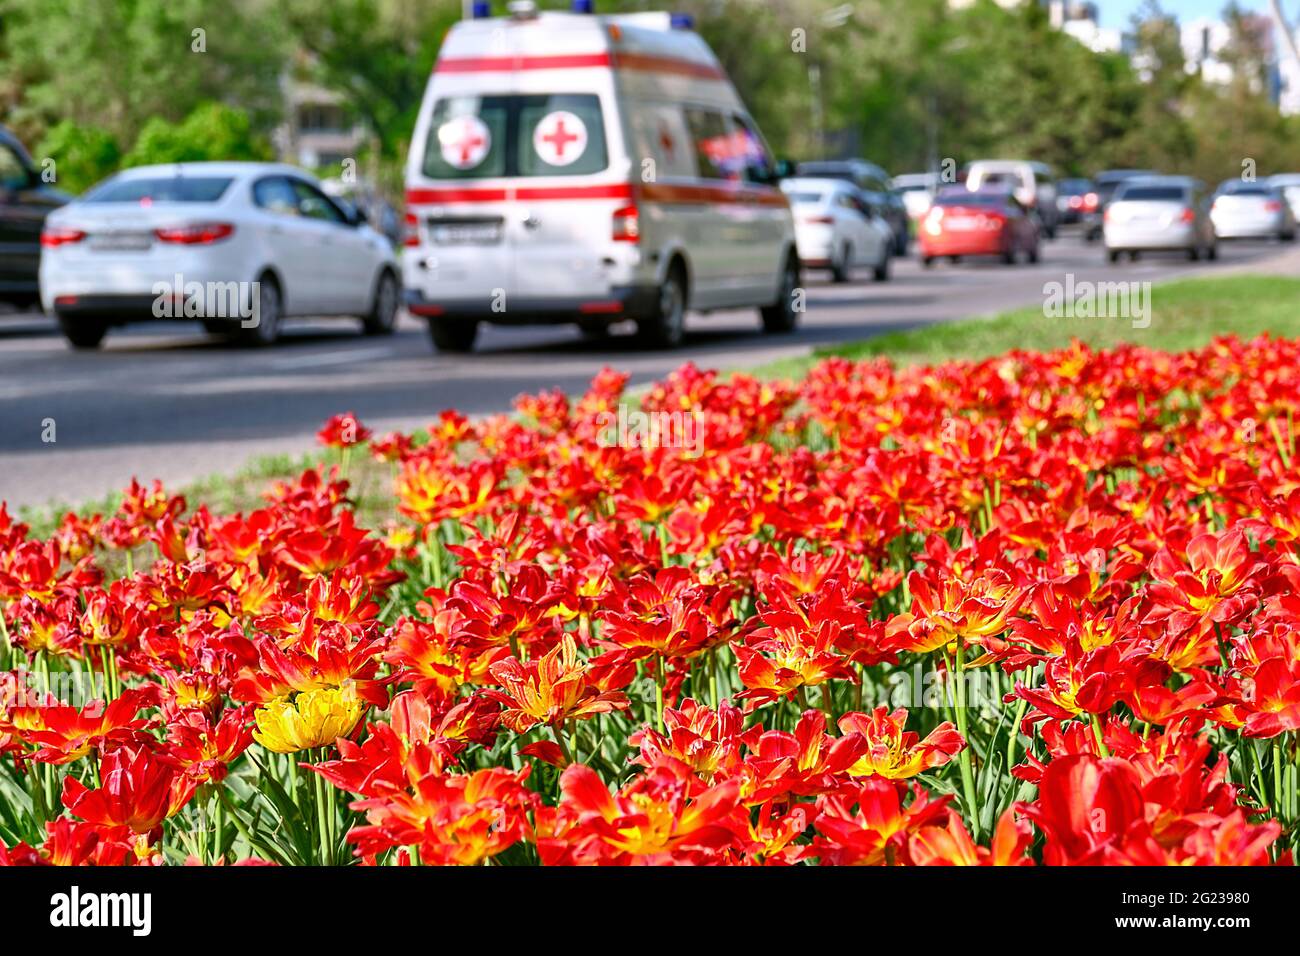 Blooming red tulips on the background of city traffic with ambulance Stock Photo